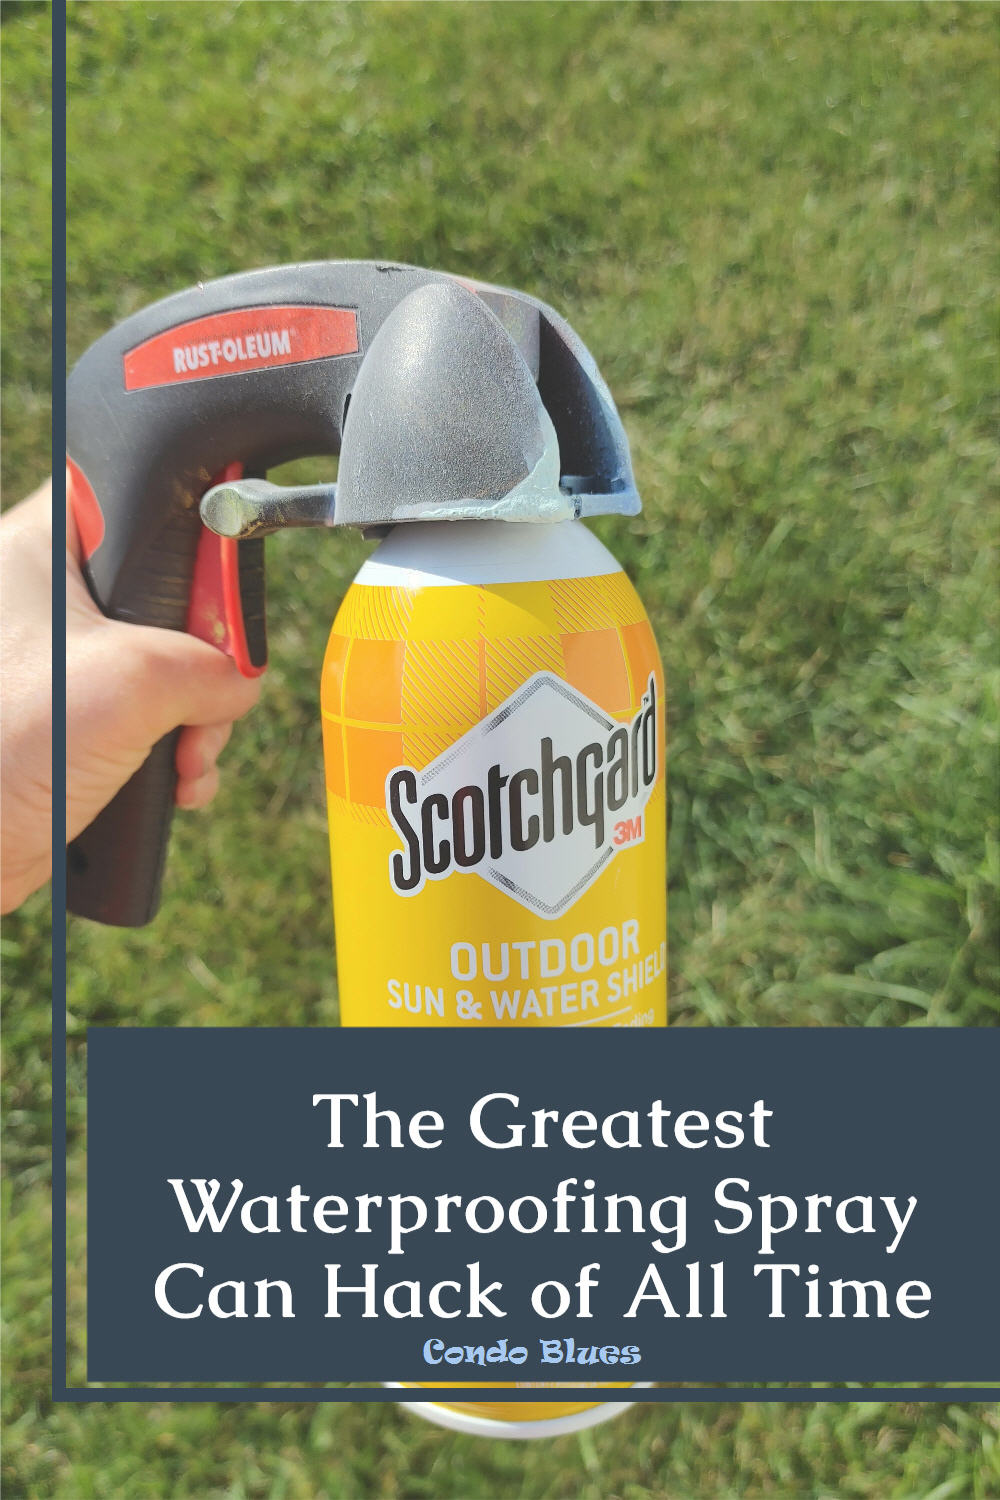 Condo Blues: The Greatest Waterproofing Spray Can Hack of All Time